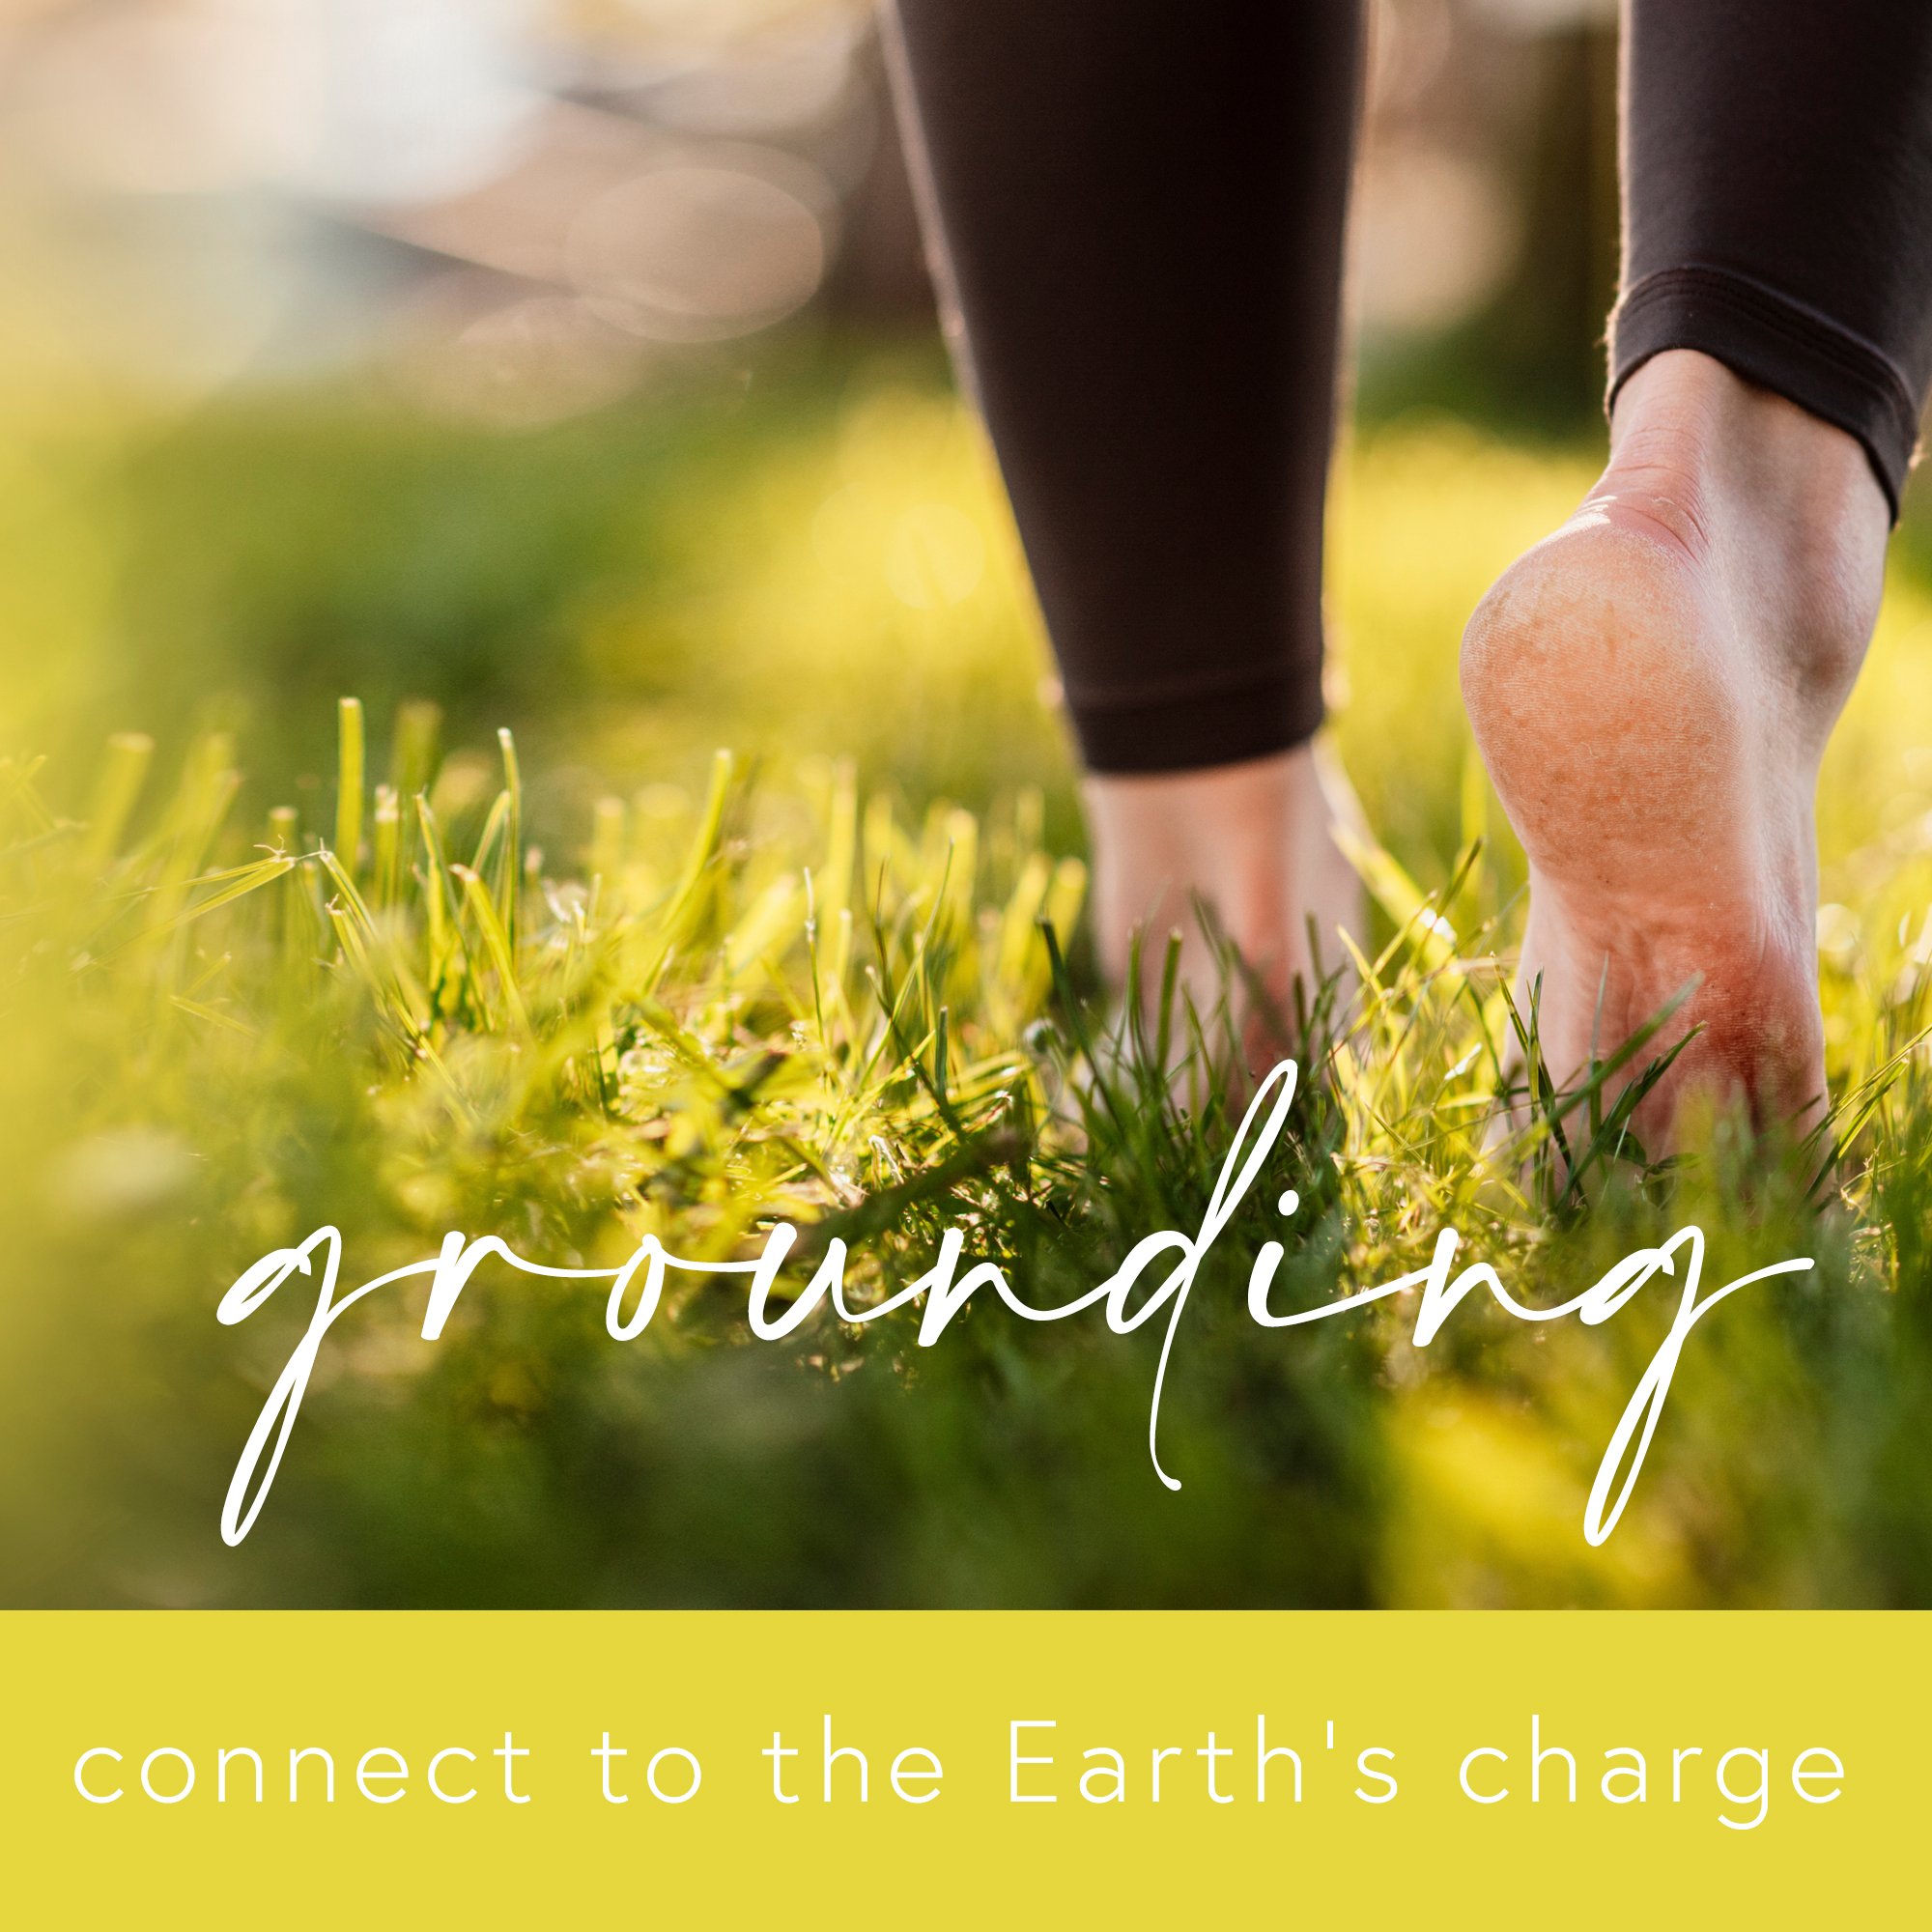 Kick those shoes off! One of the most powerful and free things you can do for your health is walking outside barefoot! 🙌 This is called grounding. When your bare feet and skin touches the Earth, it connects you to the Earth's electric charge and imp